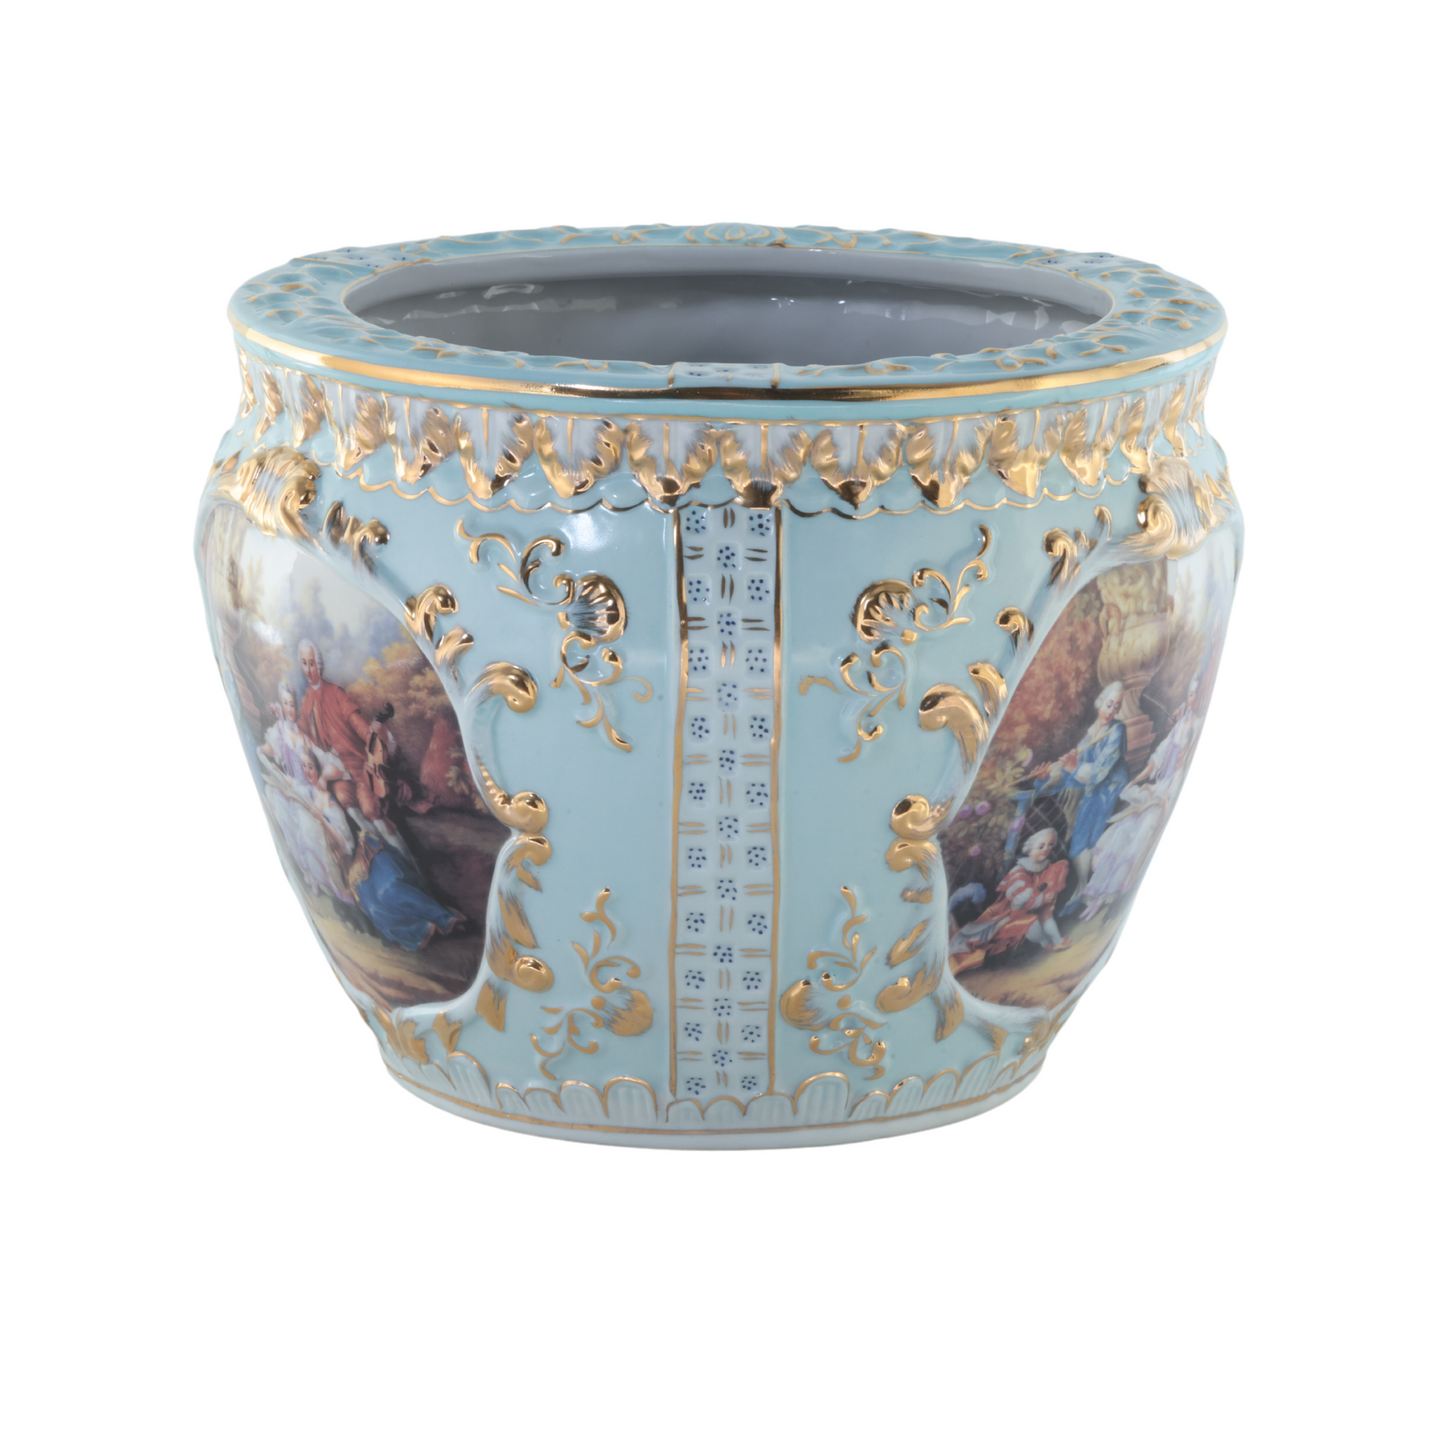 Rococo Planter Pot in Teal